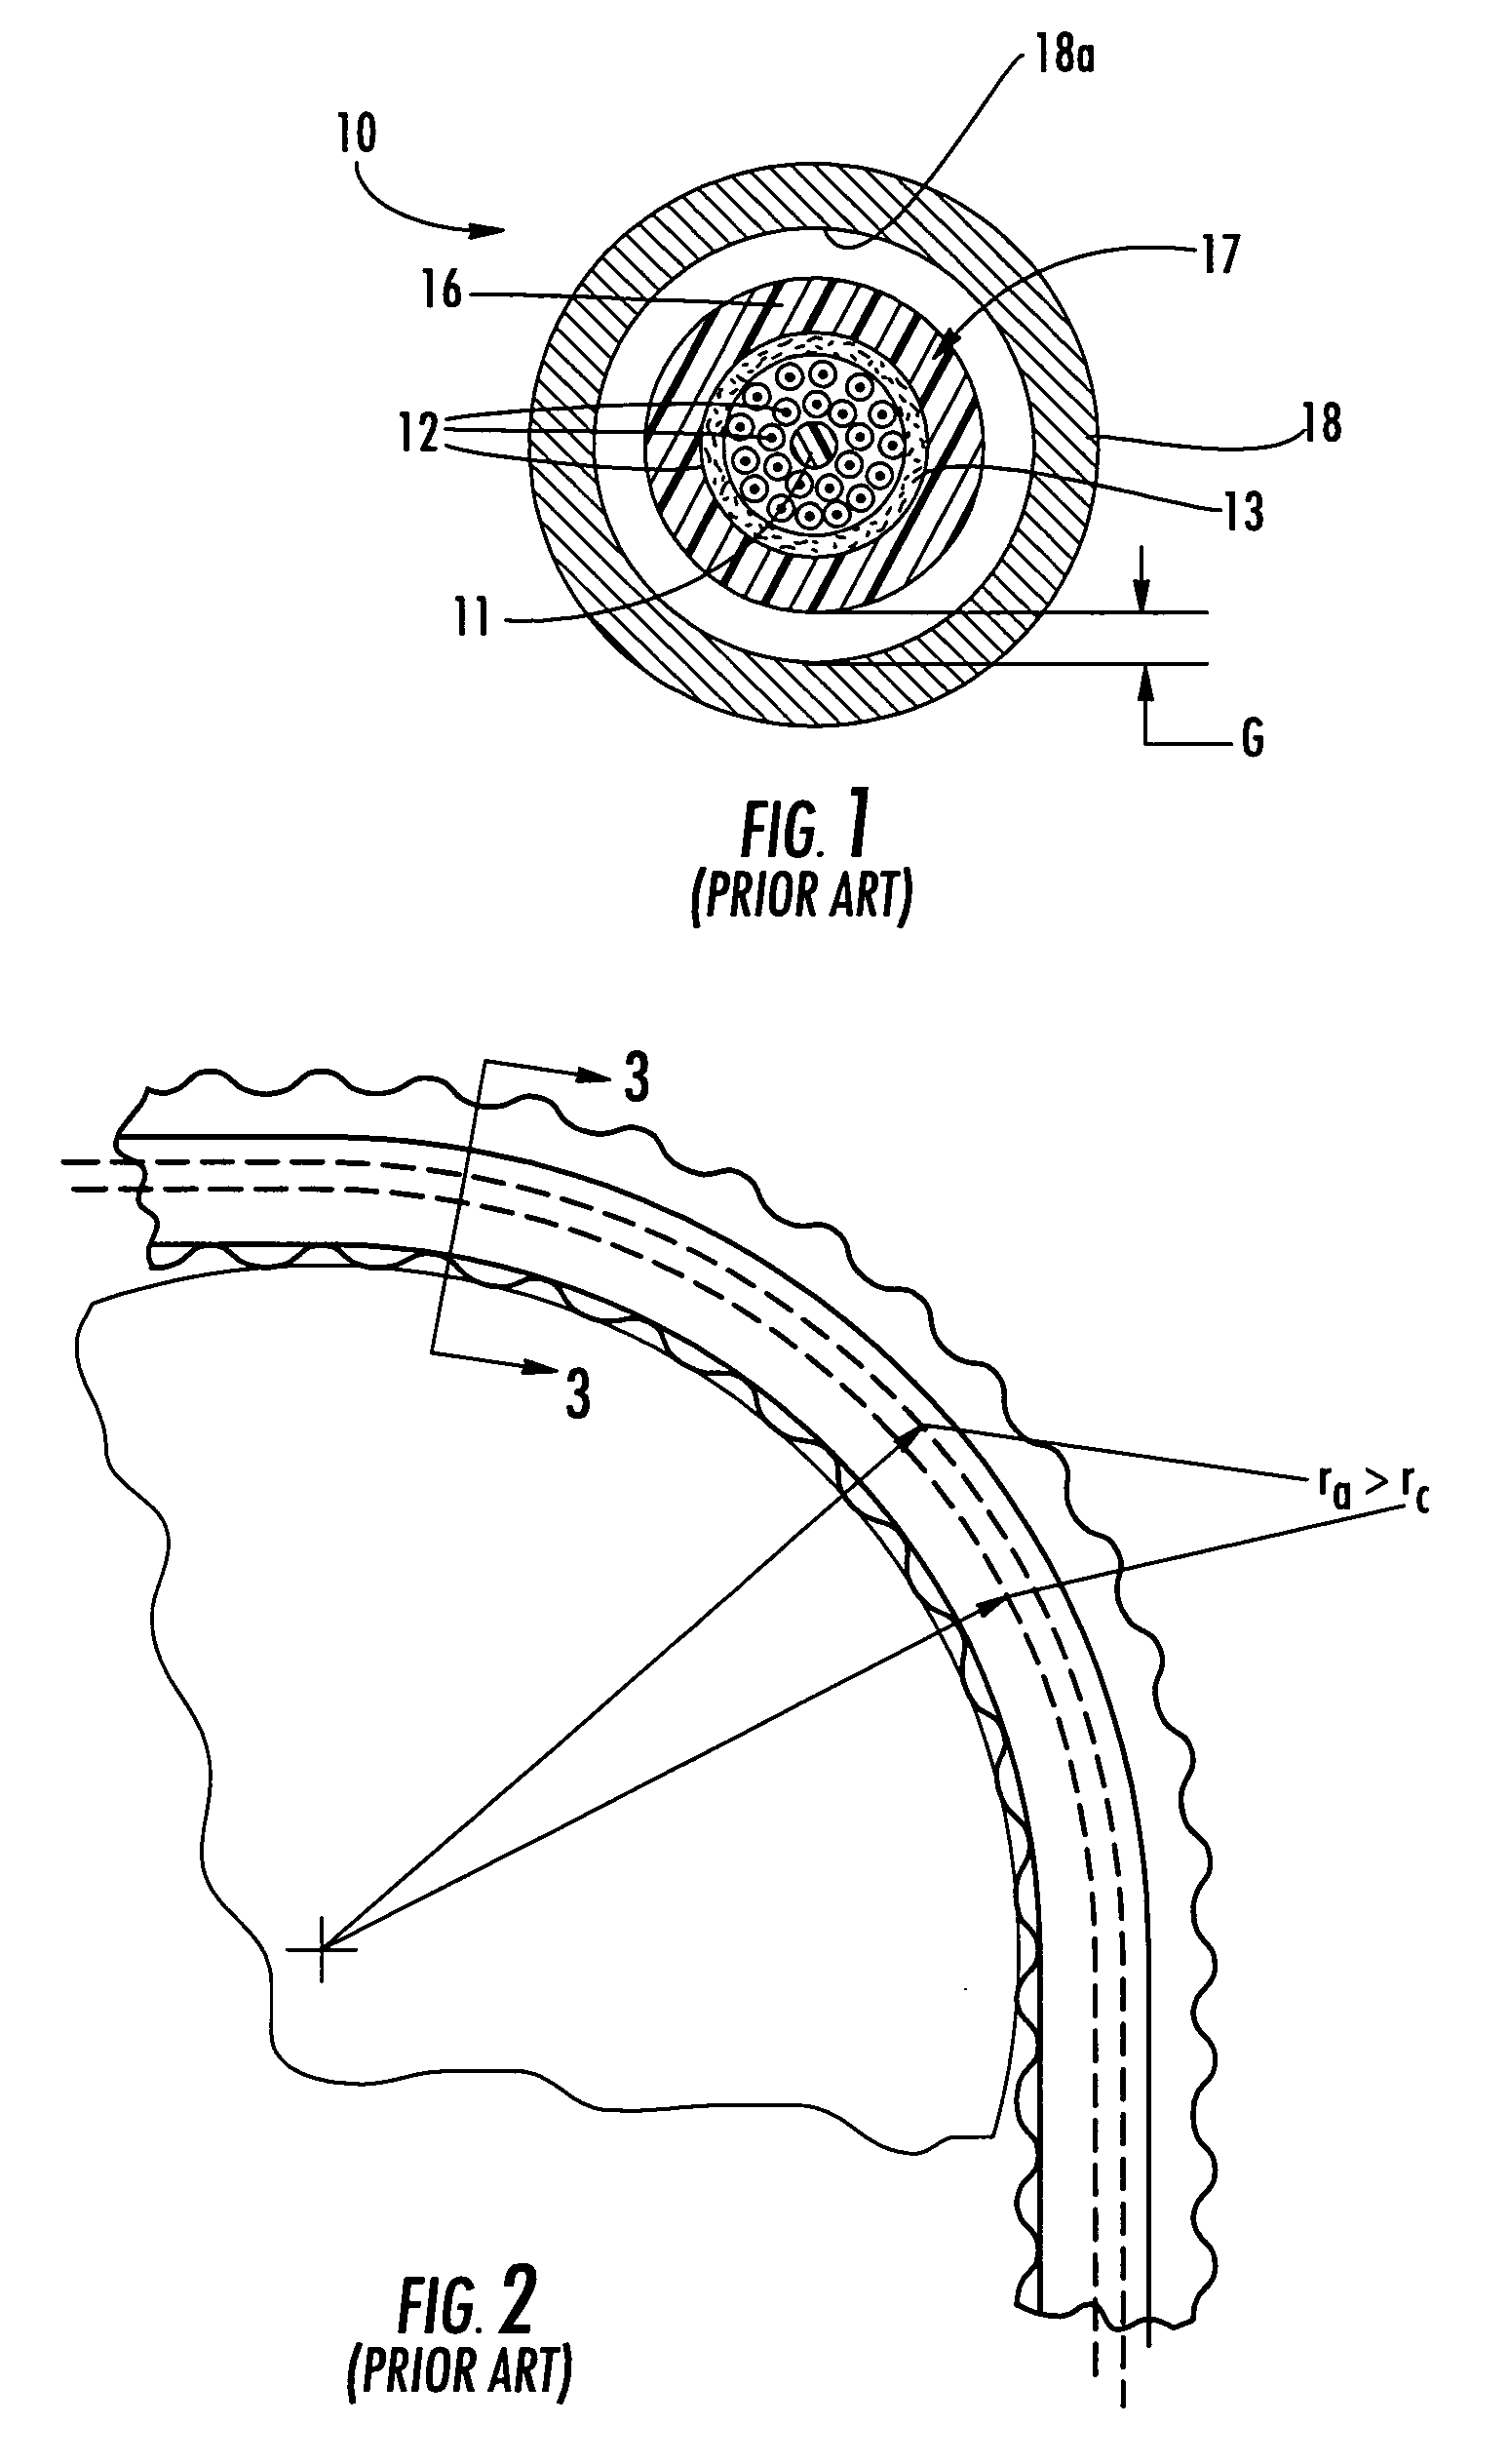 Armored fiber optic cable having a centering element and methods of making